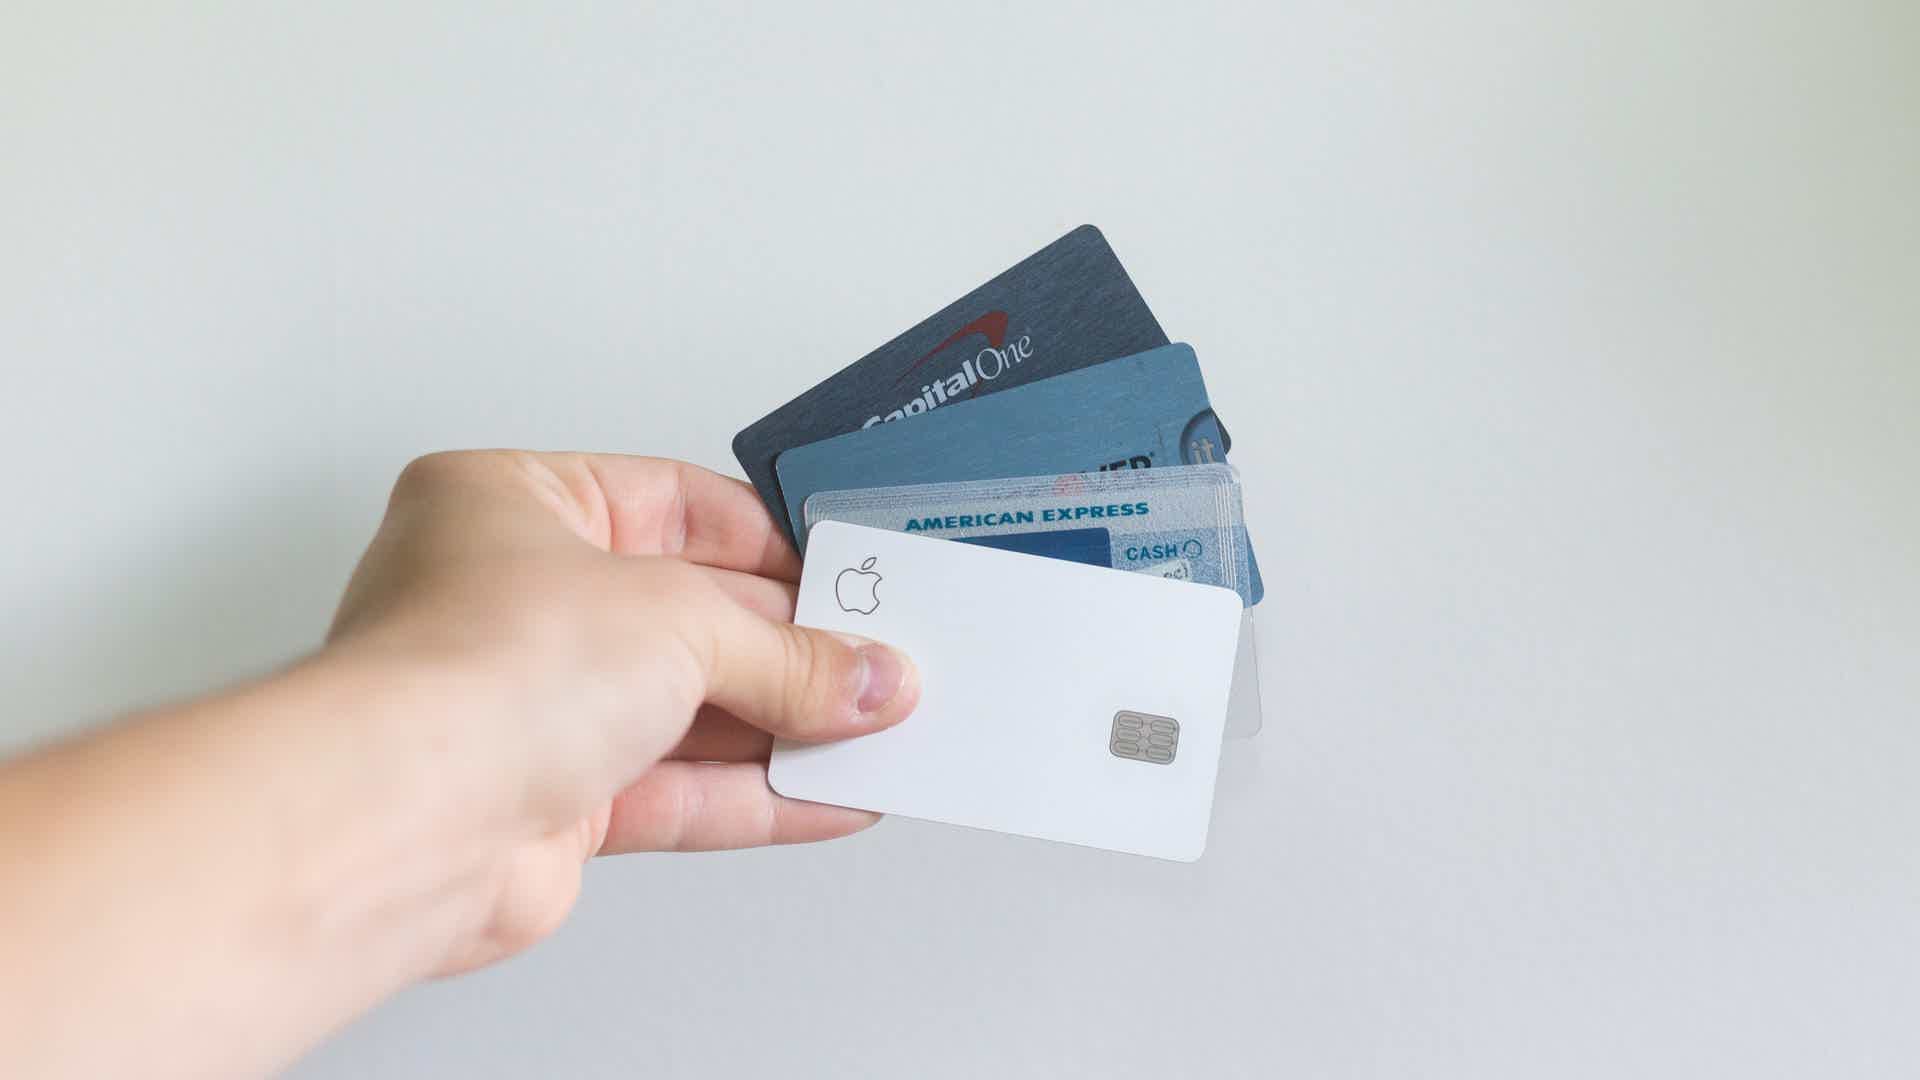 Check out the 5 easy steps and pick the best credit card for you! Source: Unsplash.